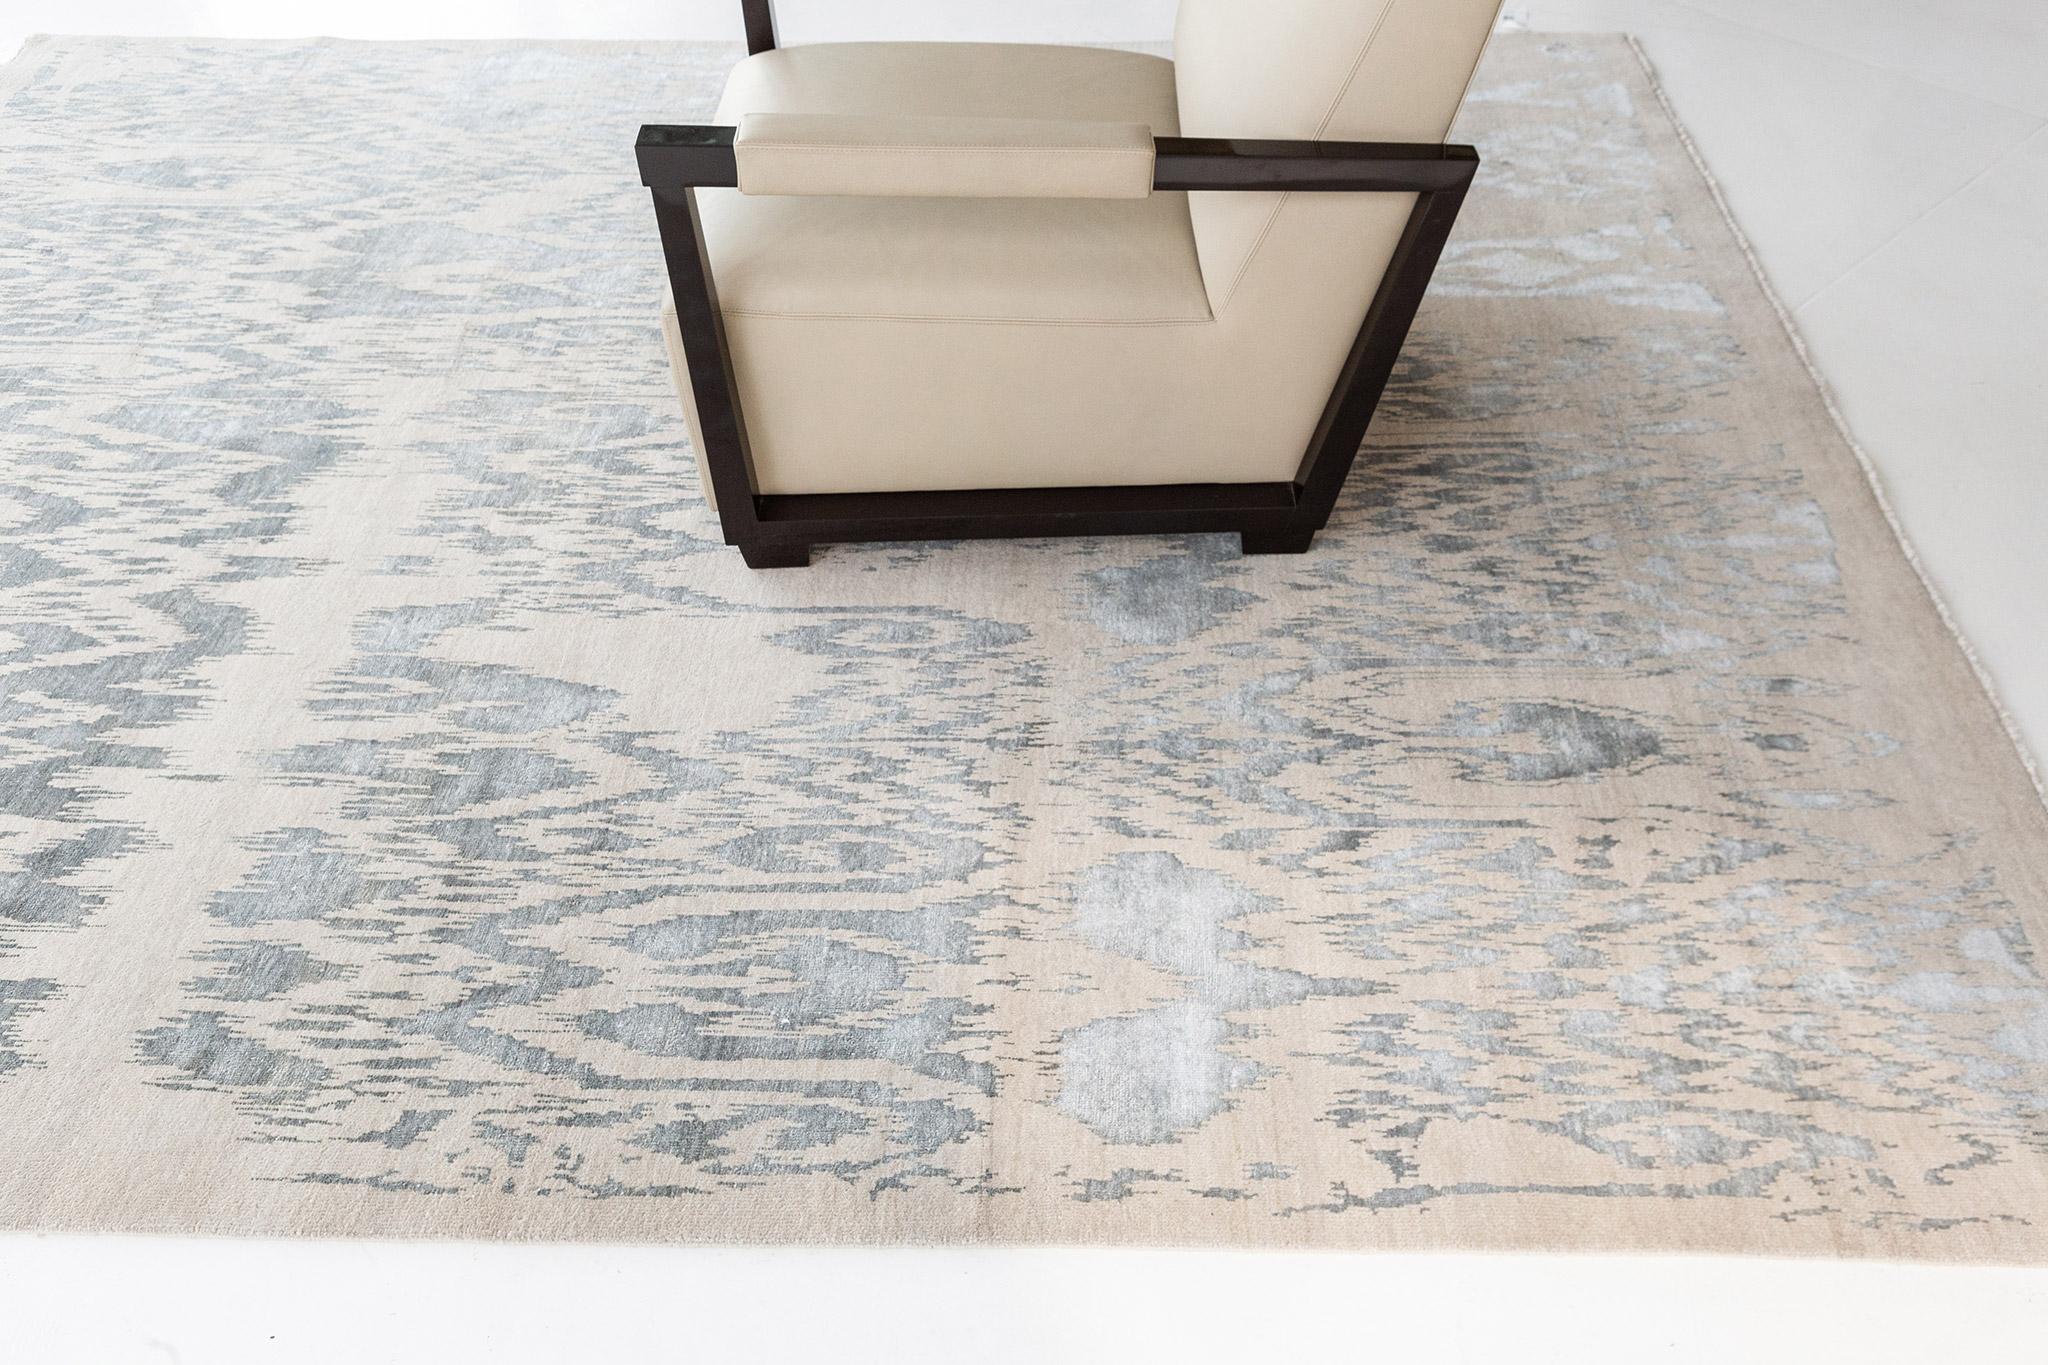 Balancing a tranquil and beguiling style, this transitional Ikat rug in Oshima beautifully displays a modern vibe. The abrashed field is covered in a repetitive Ikat pattern running along the ivory field. A perfect way to give your room a fresh,